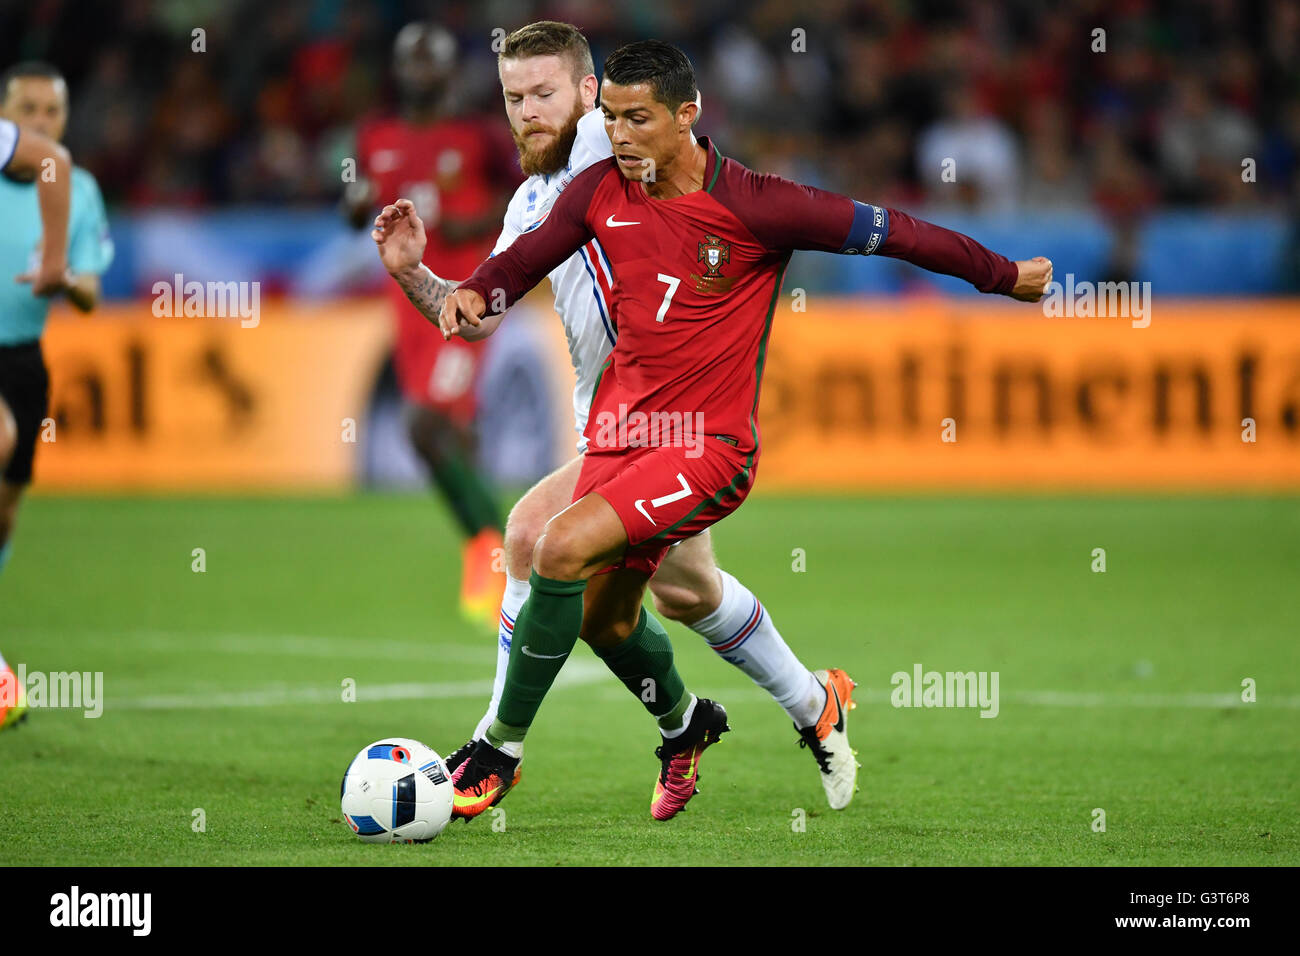 Saint-Etienne, France. 14th June, 2016. Cristiano Ronaldo (front) of Portugal and Aron Gunnarsson of Iceland vie for the ball during the UEFA Euro 2016 Group F soccer match Portugal vs. Iceland at Stade Geoffroy Guichard in Saint-Etienne, France, 14 June 2016. Photo: Uwe Anspach/dpa/Alamy Live News Stock Photo